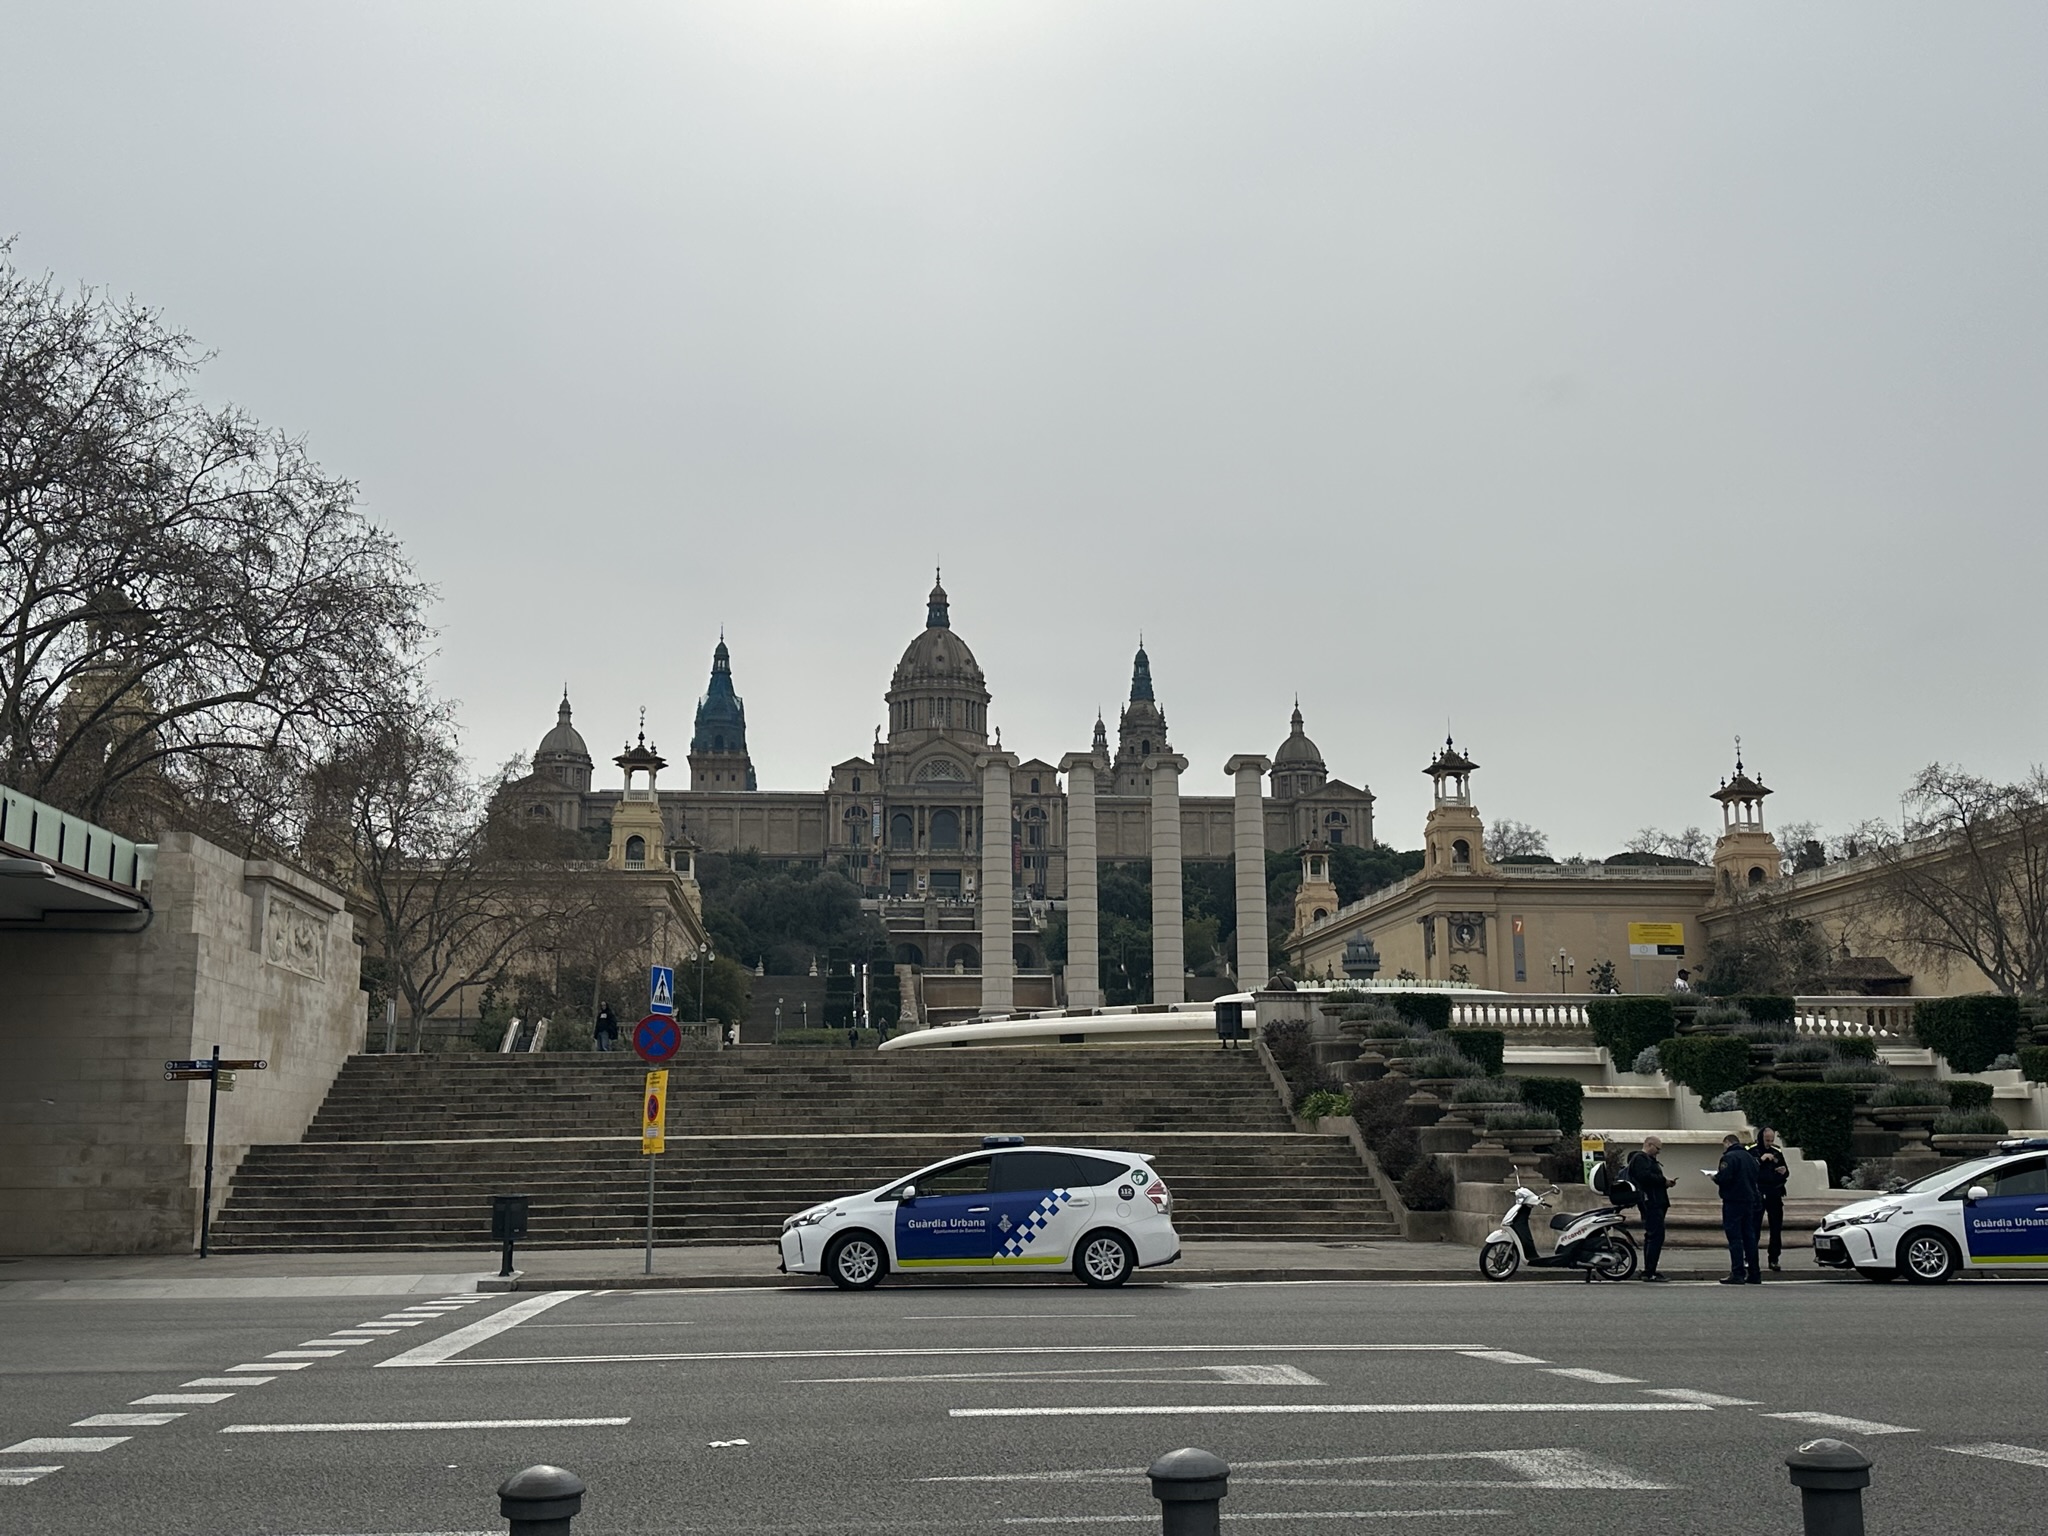 Montjuic is vast with many places to visit and explore I spent an entire day exploring